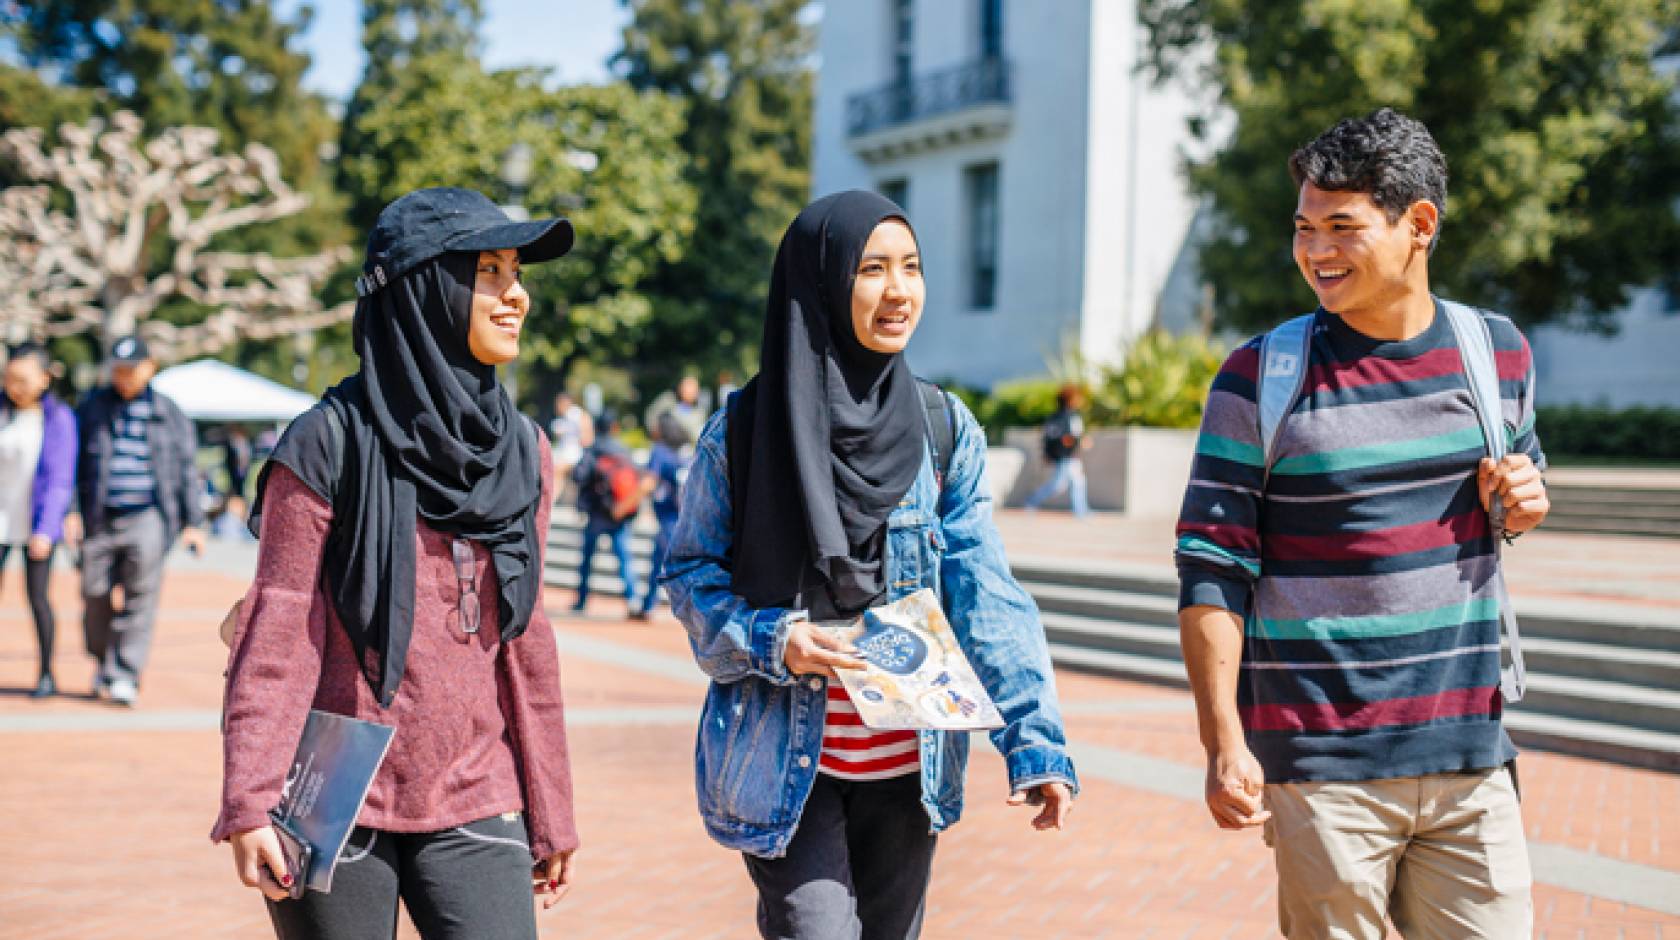 UC is the top college in America, according to new Forbes rankings ...